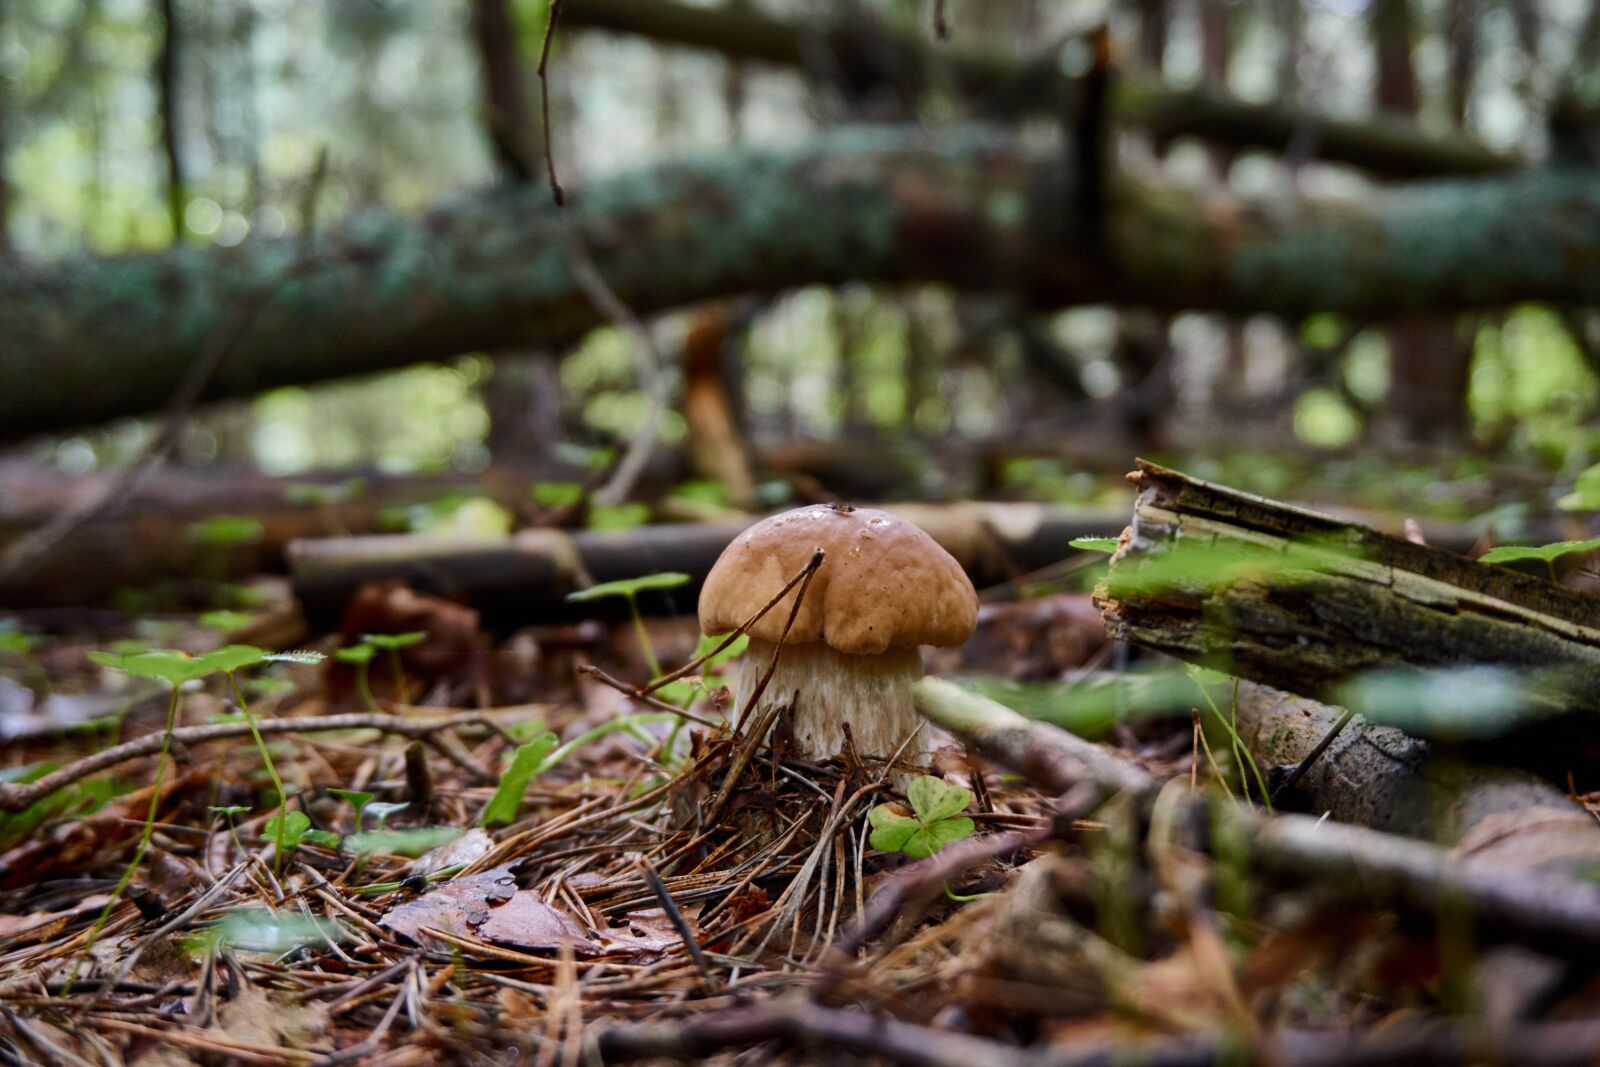 Sony a6000 + Sony E PZ 16-50 mm F3.5-5.6 OSS (SELP1650) sample photo. Mushroom, fores, summer photography